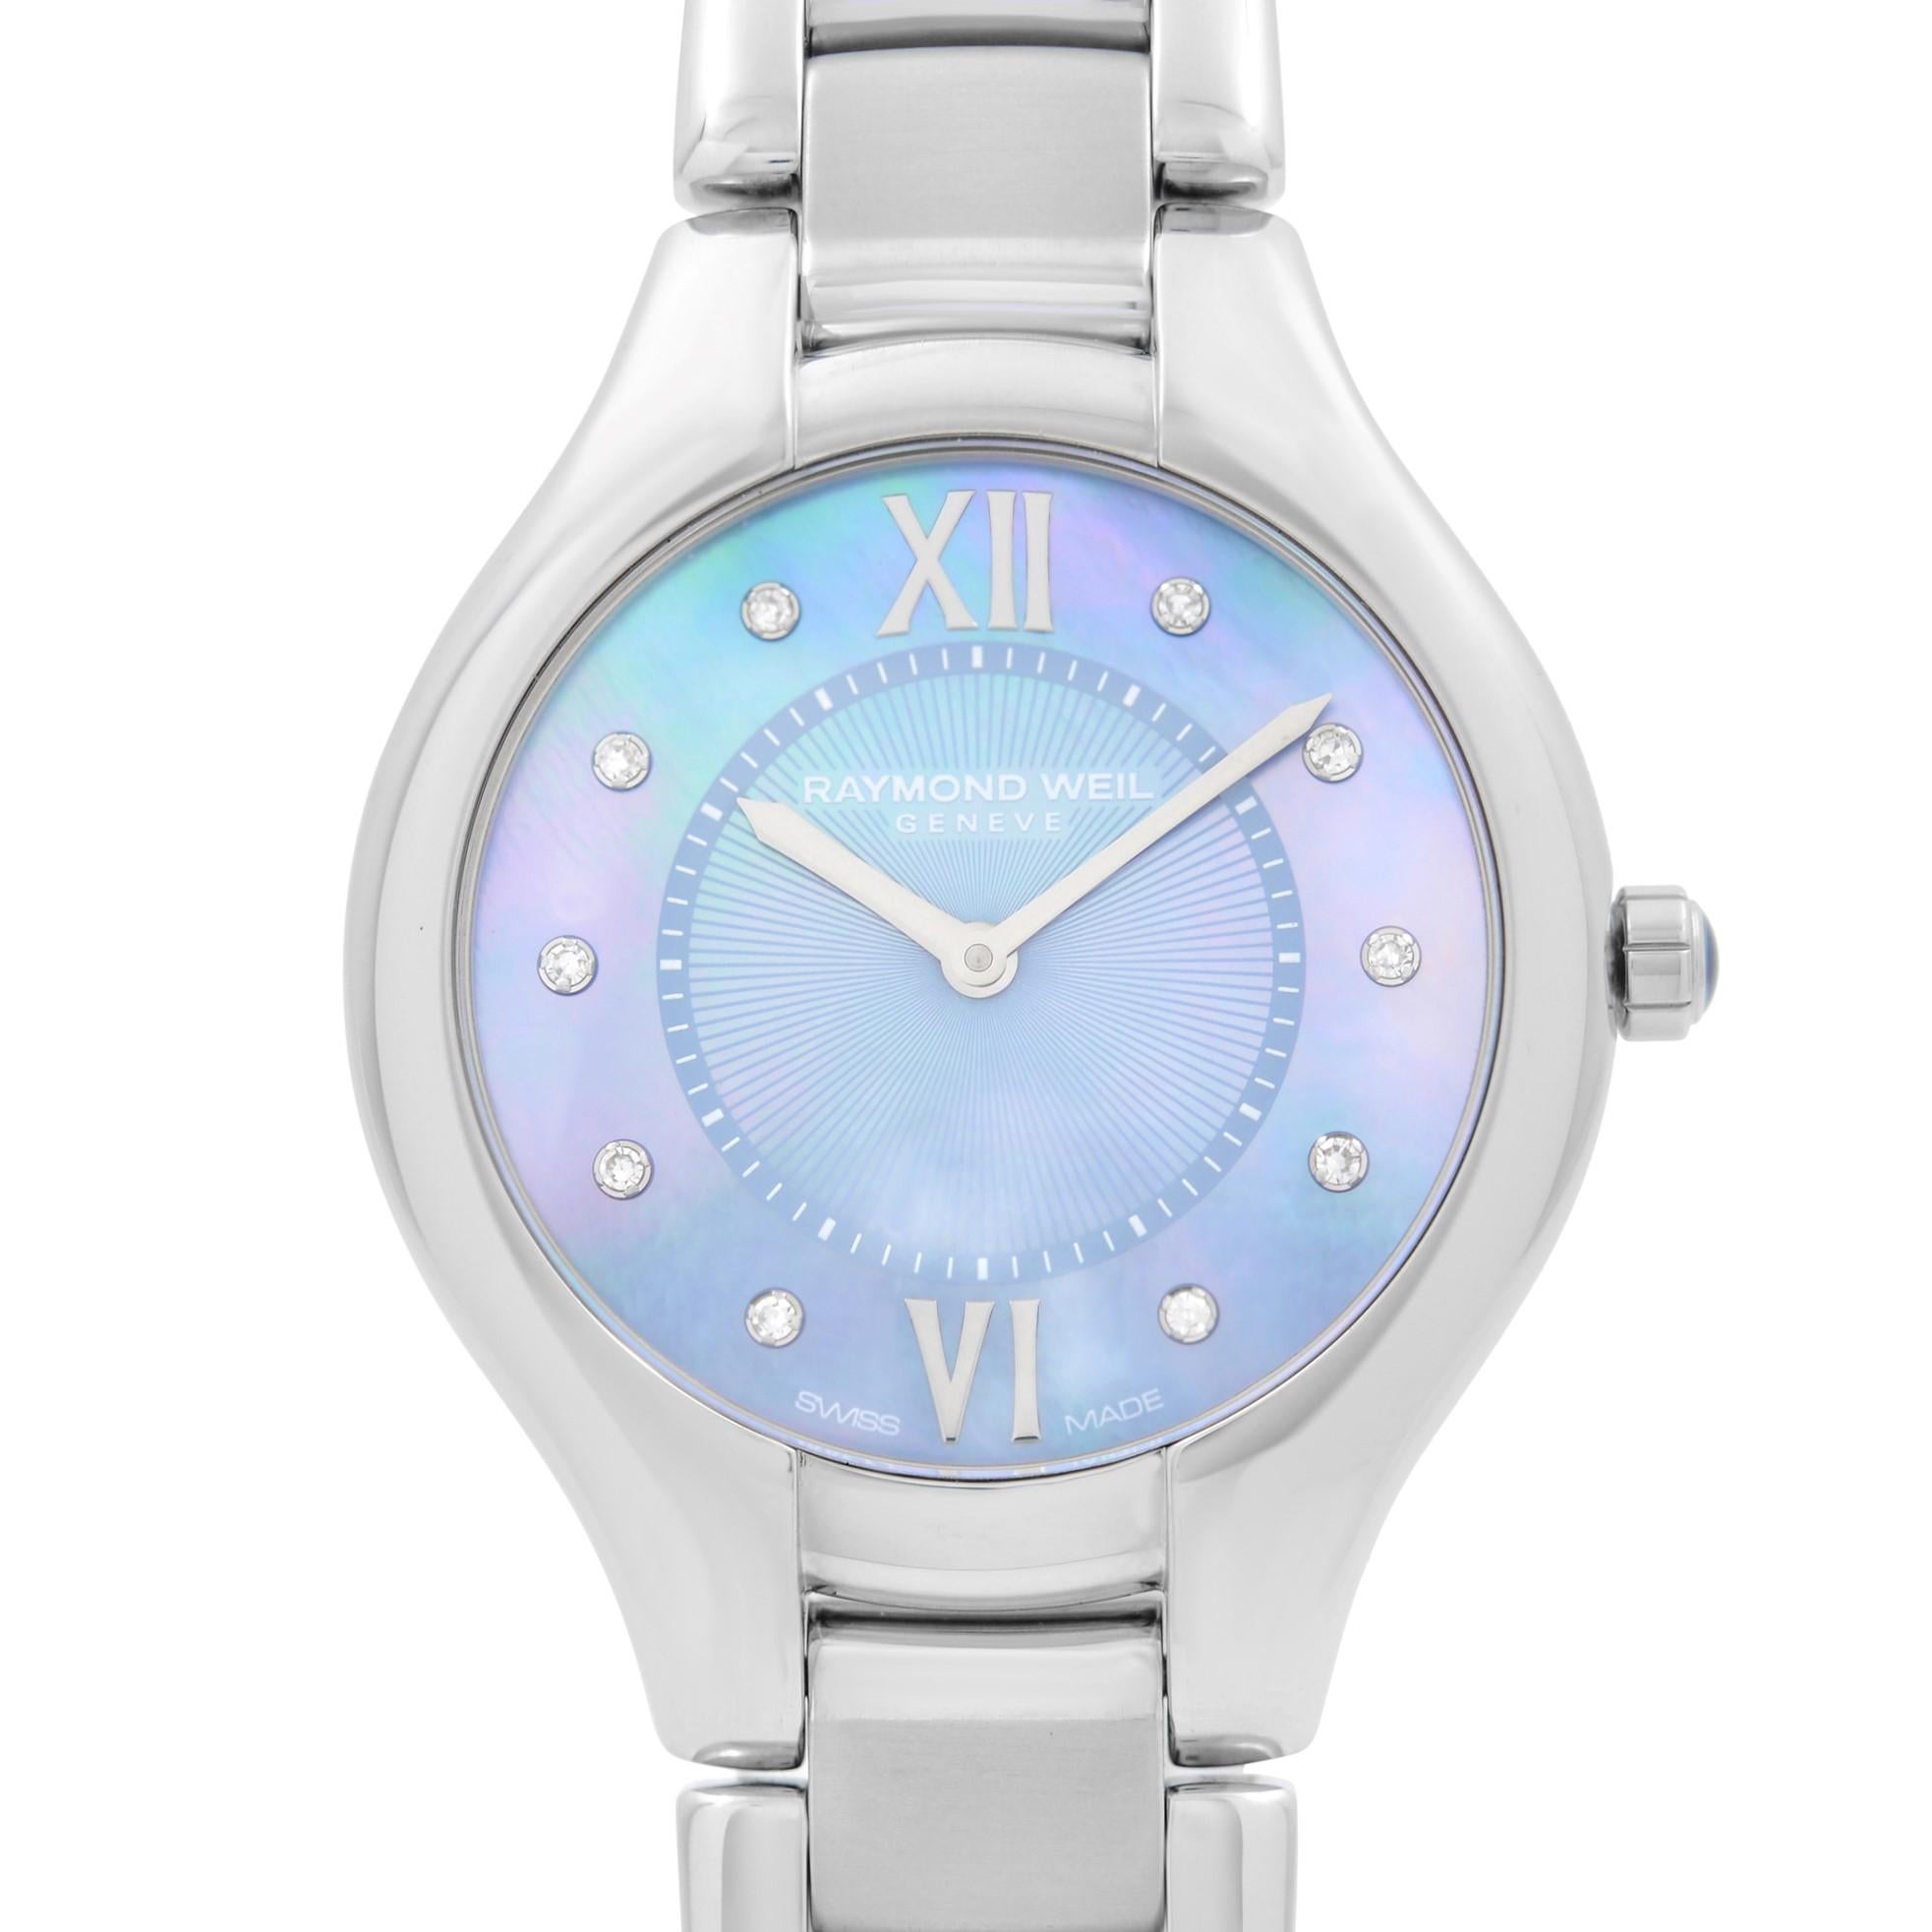 New Raymond Weil Noemia 32mm Steel Diamond Blue MOP Dial Ladies Watch 5132-ST-00955. This Beautiful Timepiece Features: Stainless Steel Case and Bracelet, Fixed Stainless Steel Bezel, Blue Mother-of-Pearl Dial with Silver-Tone Hands, And Diamond and